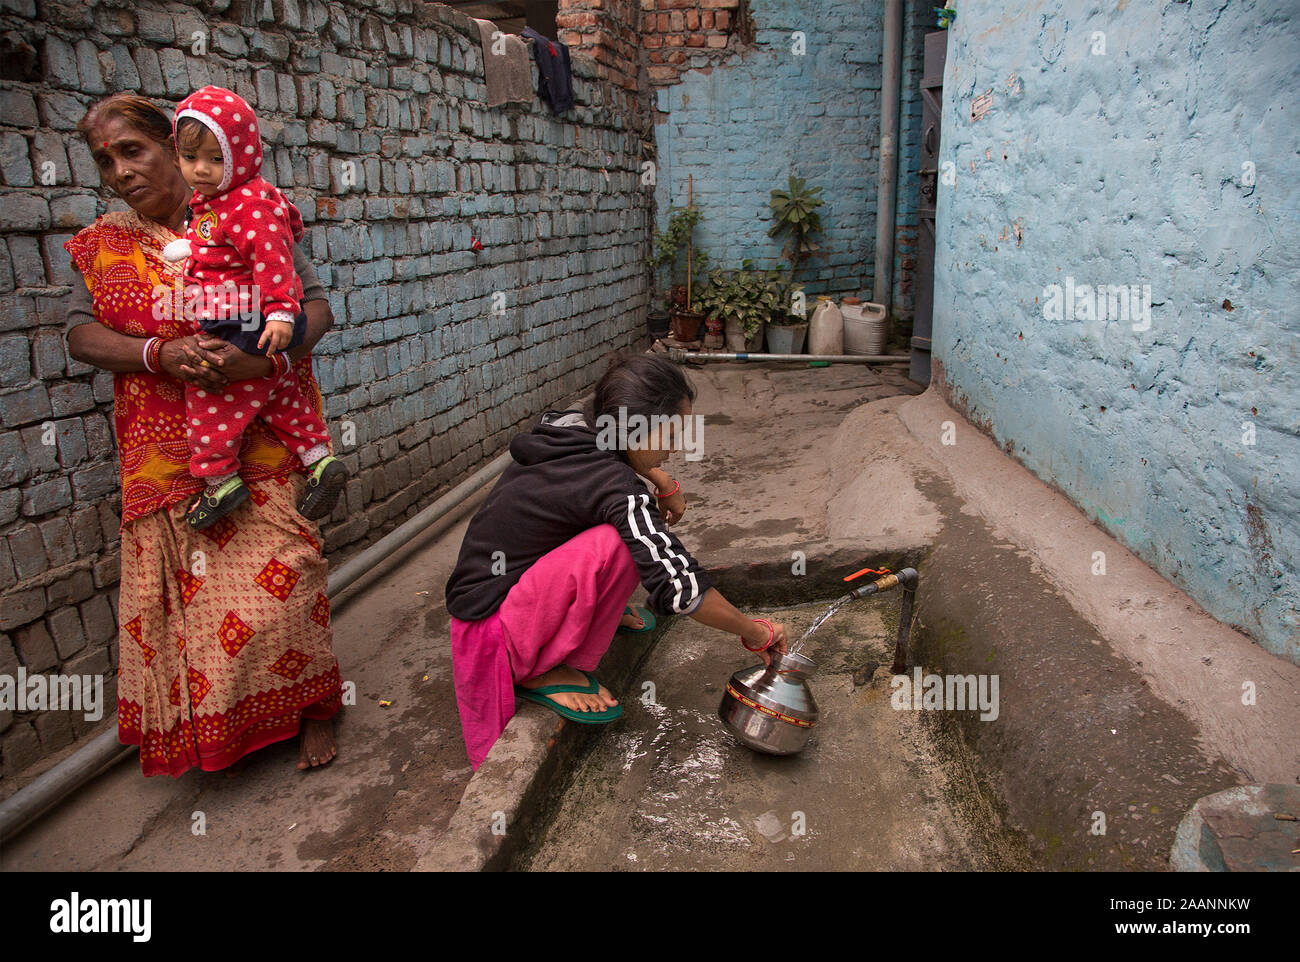 (191123) -- NEW DELHI, Nov. 23, 2019 (Xinhua) -- A woman gets drinking water from a tap with a container in New Delhi, India, Nov. 23, 2019. Days after India's federal government rankings on tap water showed samples taken from the capital city Delhi have failed on all parameters, the local authorities Wednesday said it would collect over 3,000 fresh samples from across the city for quality check. The federal government's consumer affairs ministry last week said 11 drinking water samples drawn from various places in Delhi did not comply with the requirements of the Bureau of Indian Standard a Stock Photo